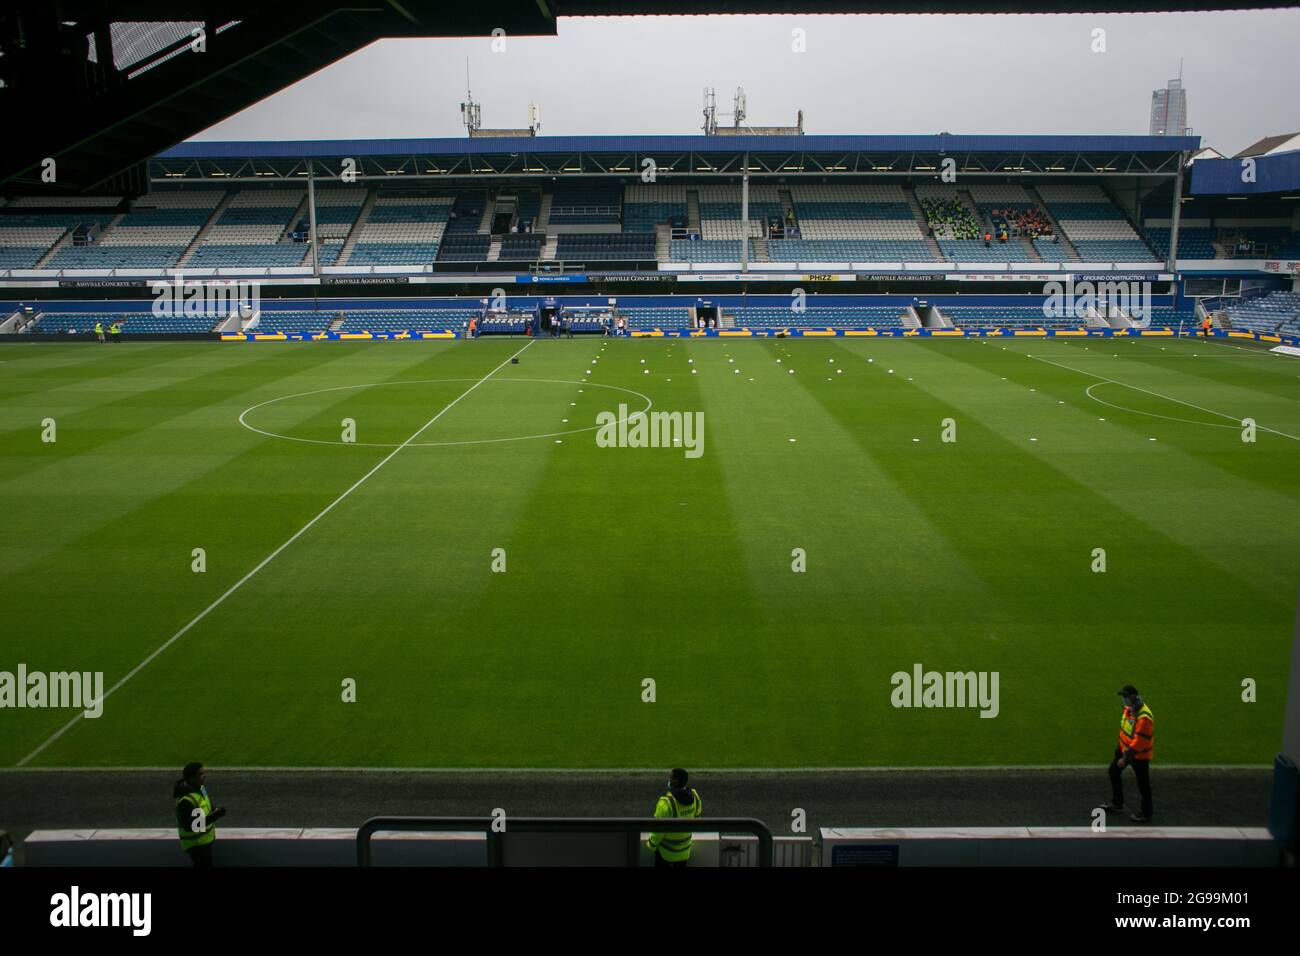 LONDON, UK. JULY 24TH  Kiyan Prince Foundation Stadium pictured during the Pre-season Friendly match between Queens Park Rangers and Manchester United at the Kiyan Prince Foundation Stadium., London on Saturday 24th July 2021. (Credit: Federico Maranesi | MI News) Stock Photo